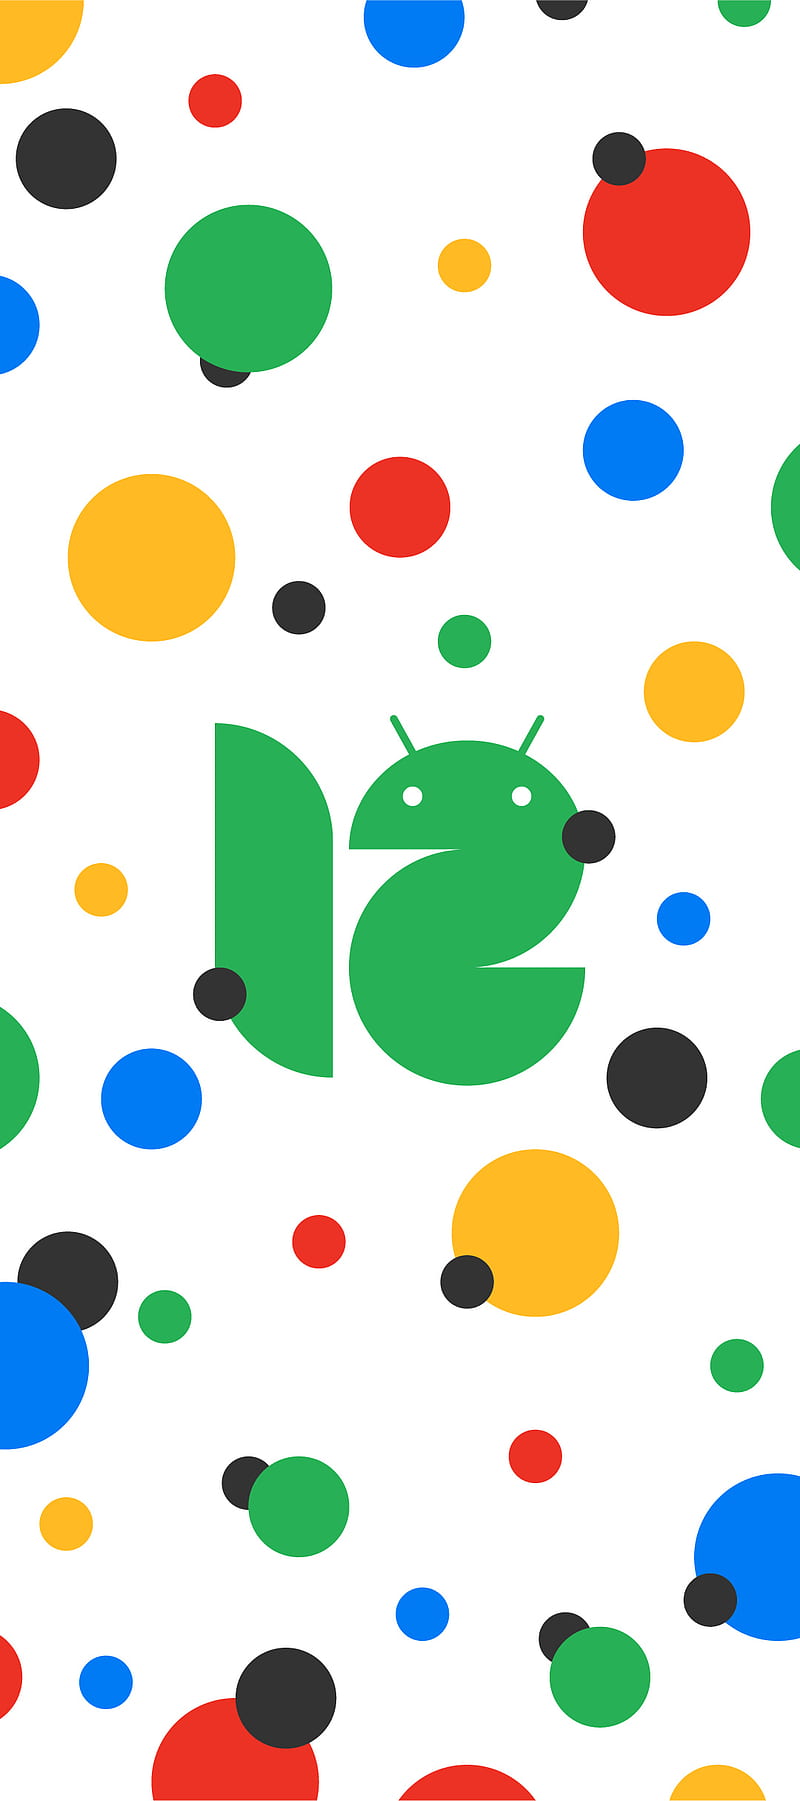 Download Android 12.1 wallpaper [Link] - Huawei Central